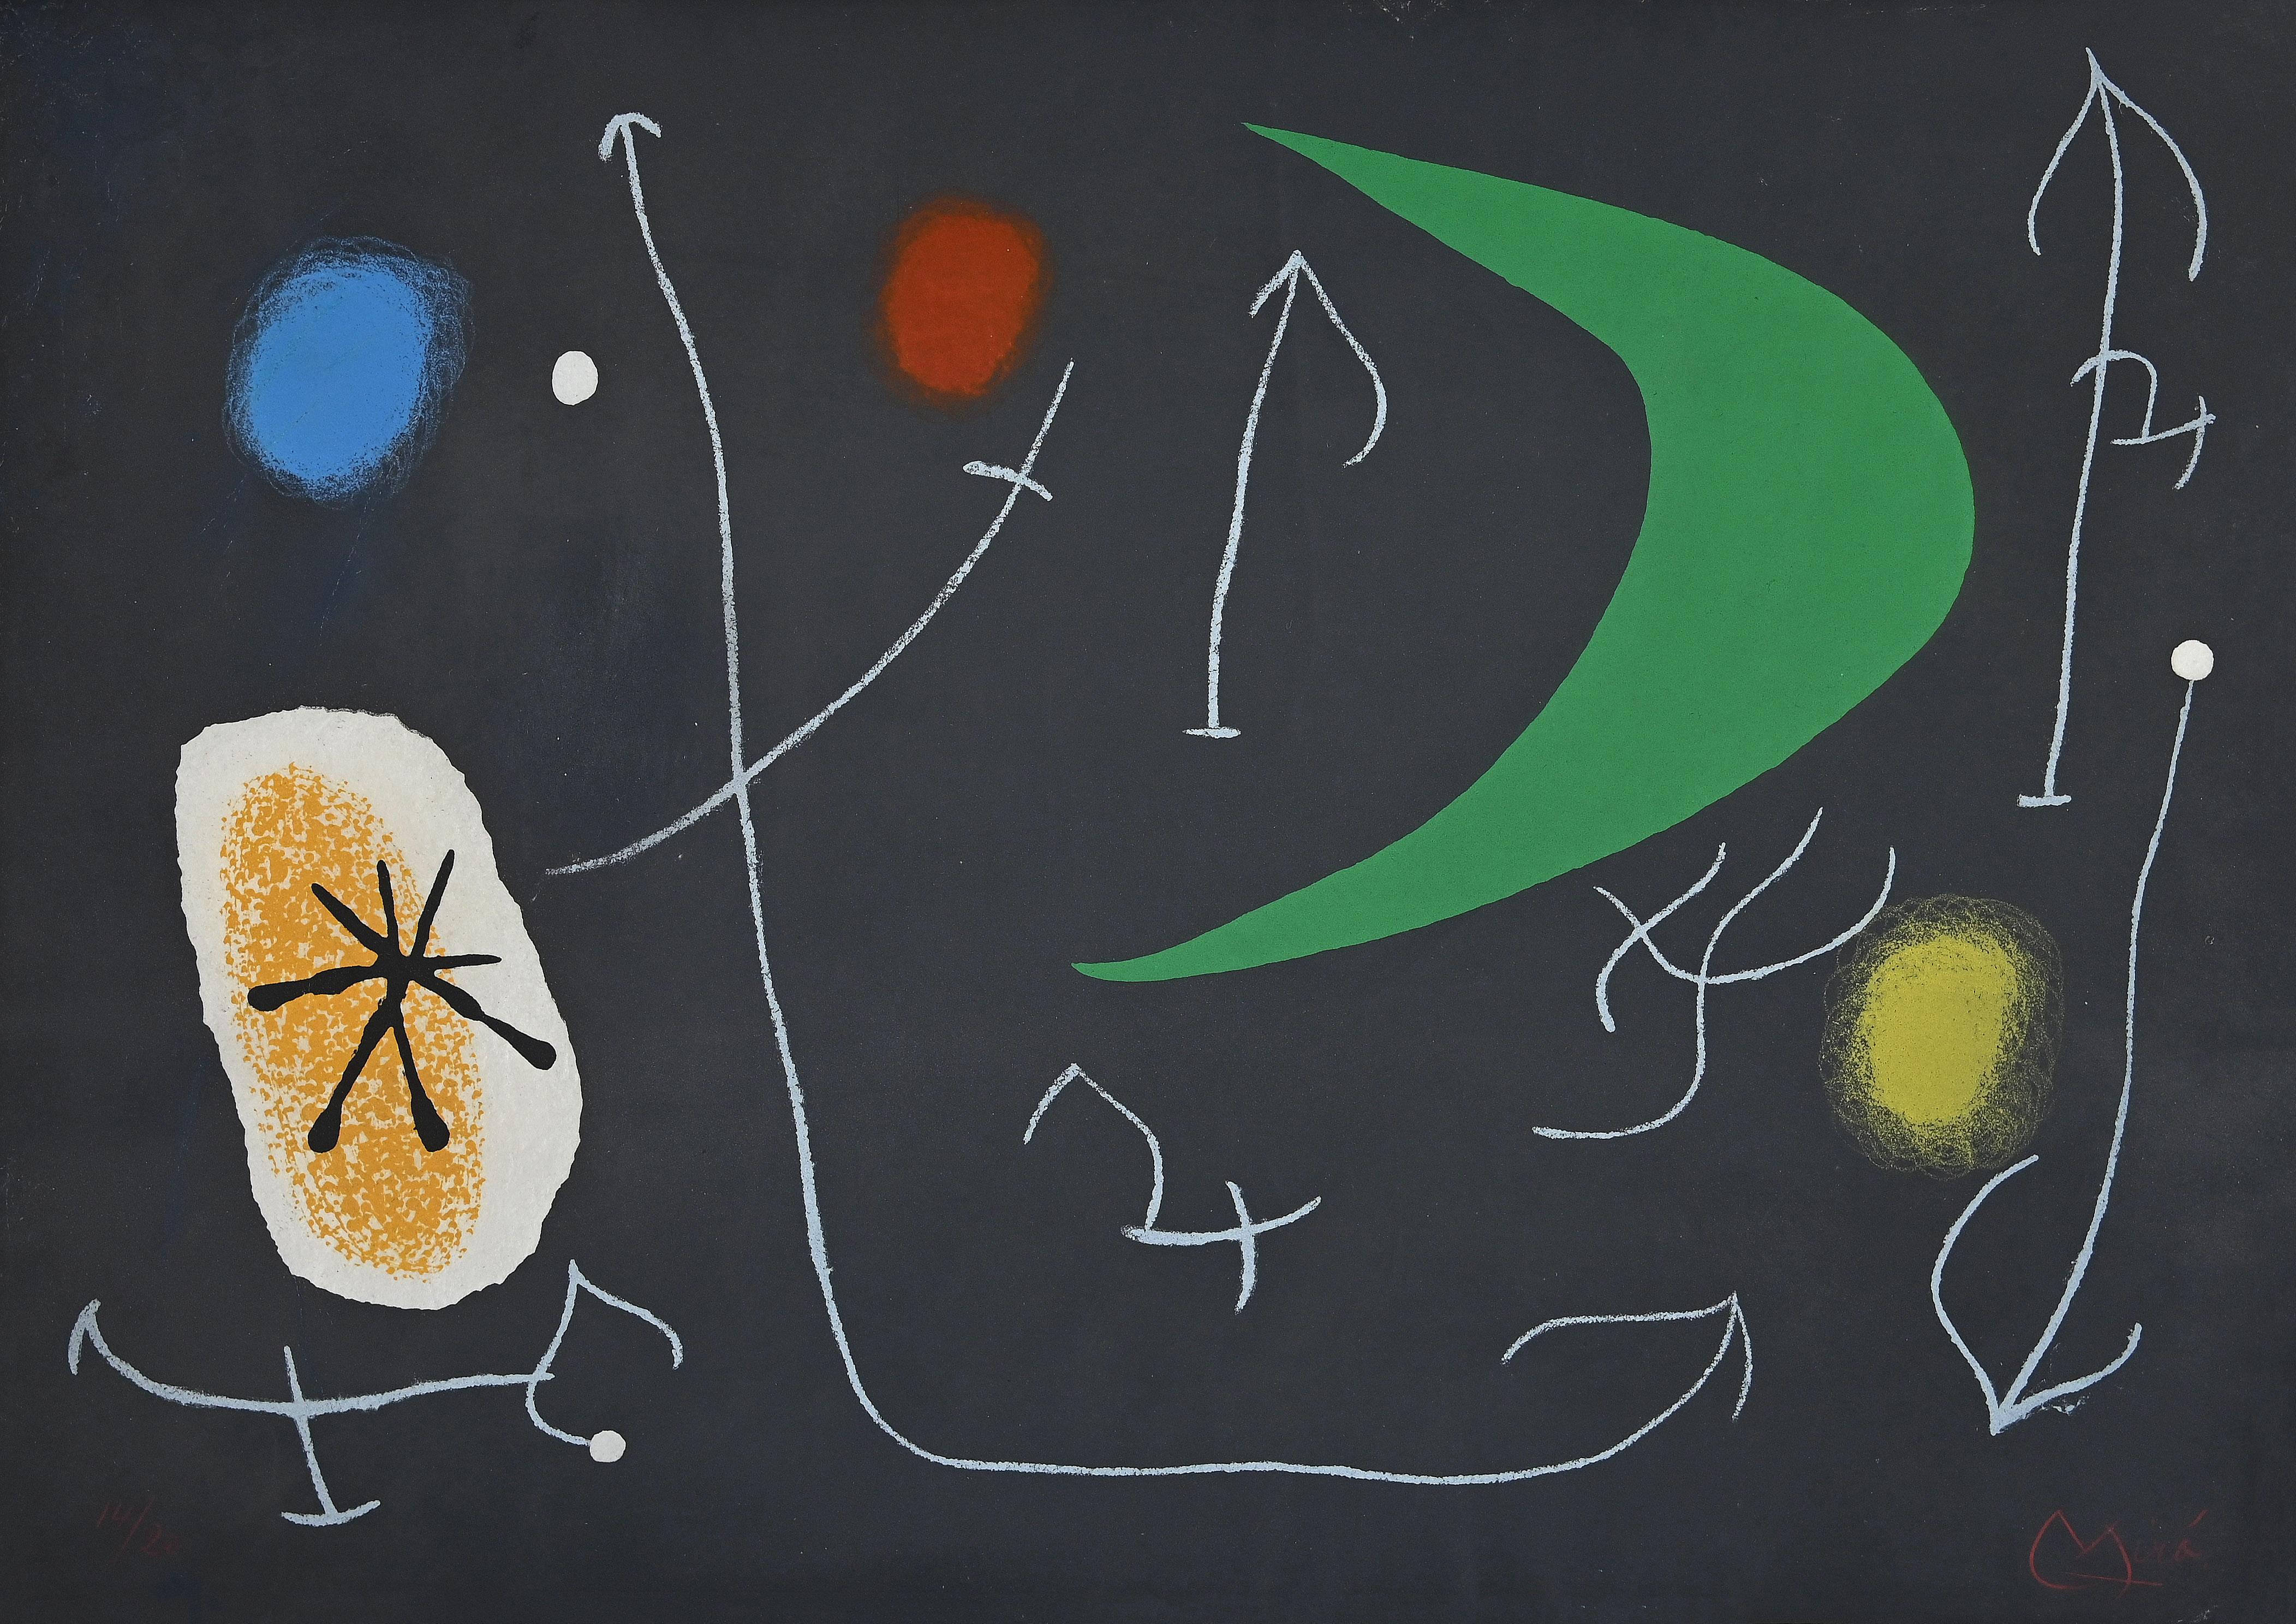 Joan Miró Abstract Print – Le Lèzard aux Plumes d'Or - Lithographie - 1971